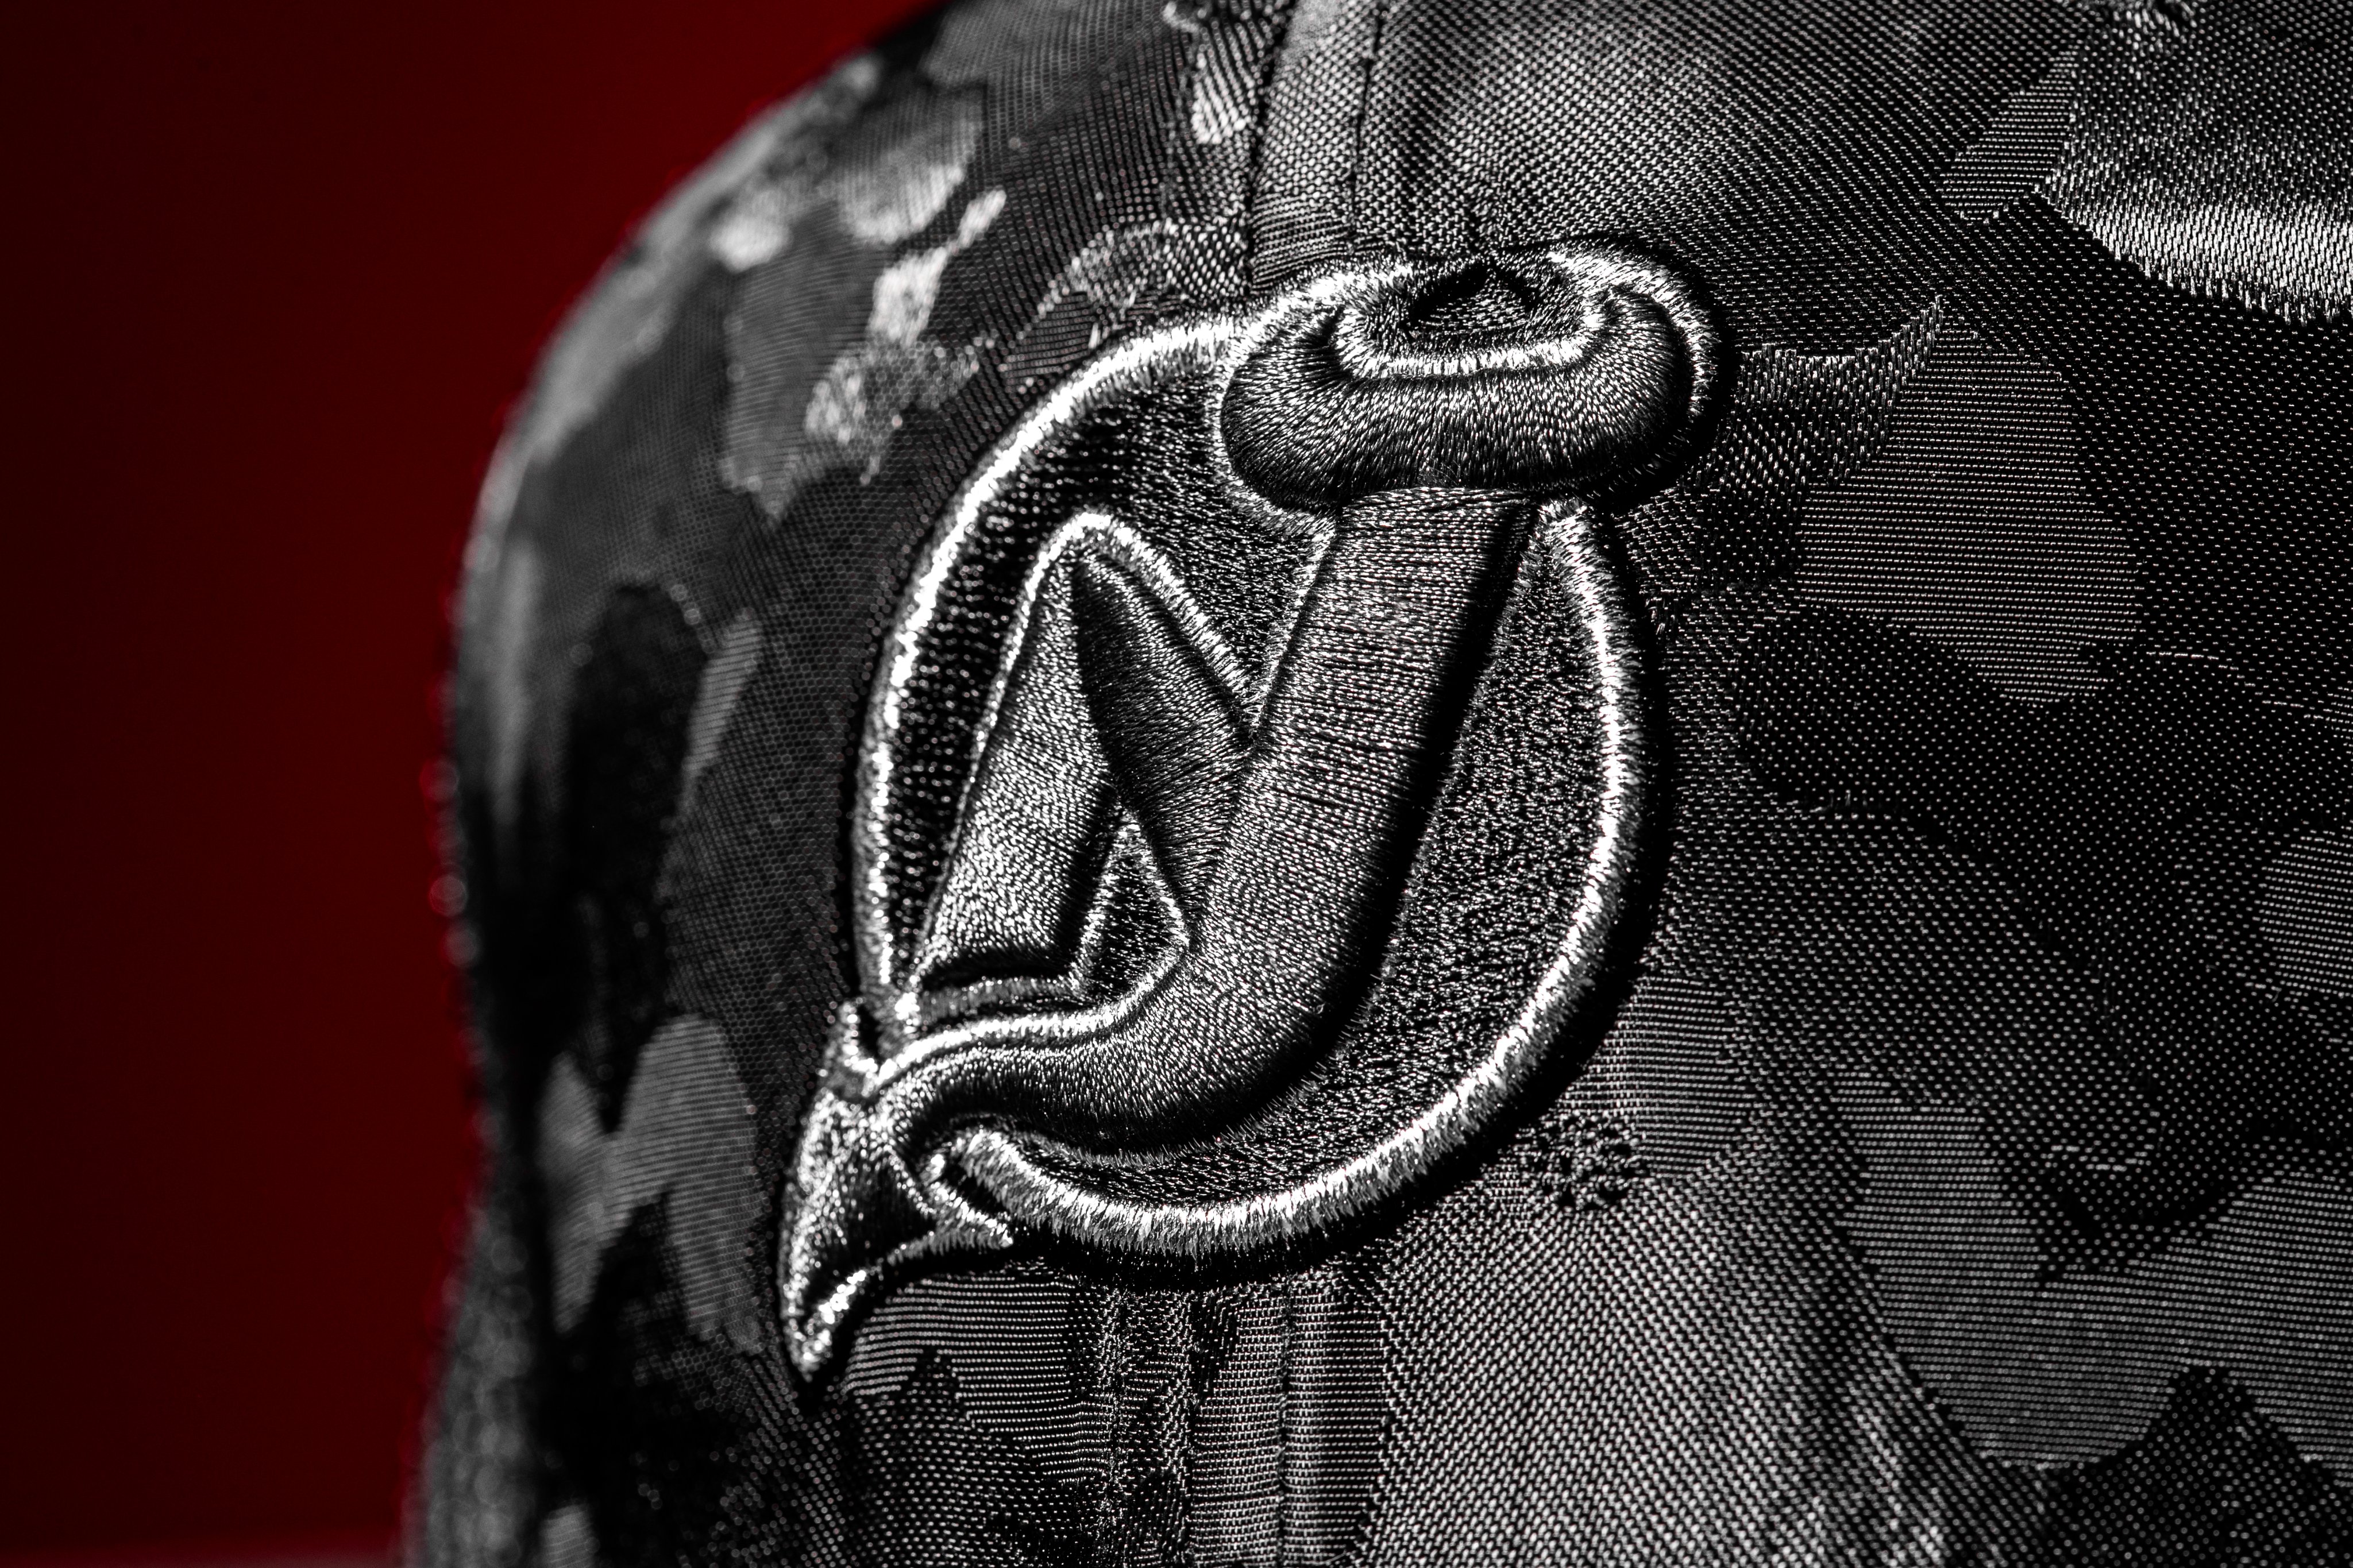 New Jersey Devils - Want a Devils camouflage jersey from our upcoming  Military Appreciation Night? Here's your chance, presented by Prudential!  ENTER NOW